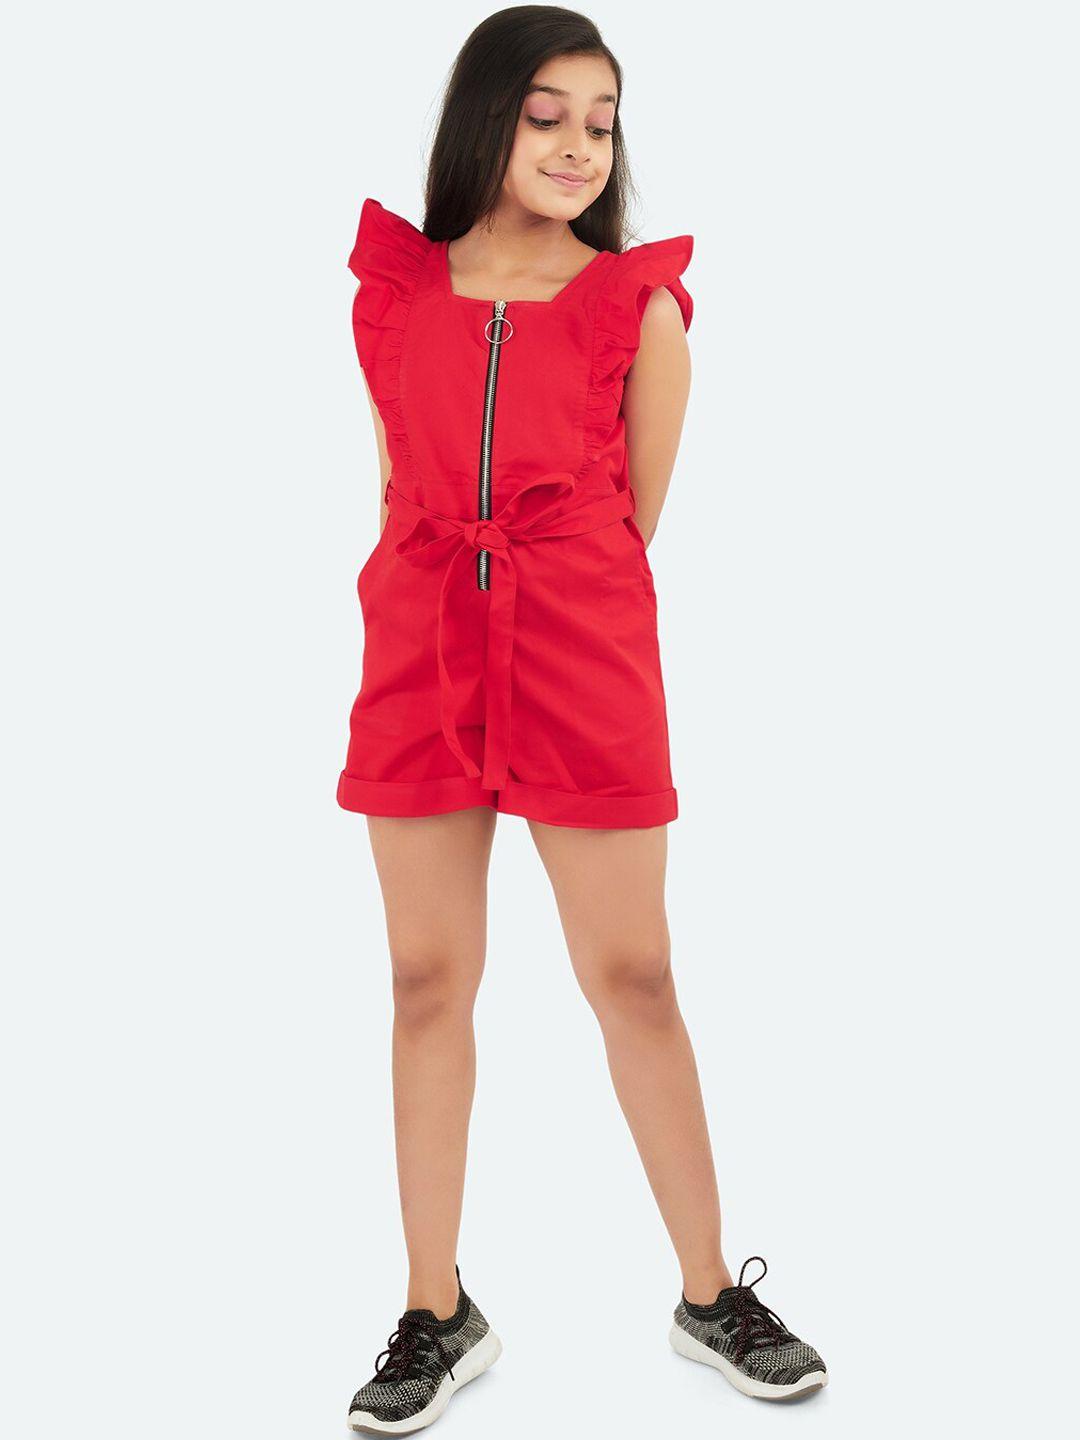 olele-girls-square-neck-cotton-twill-rompers